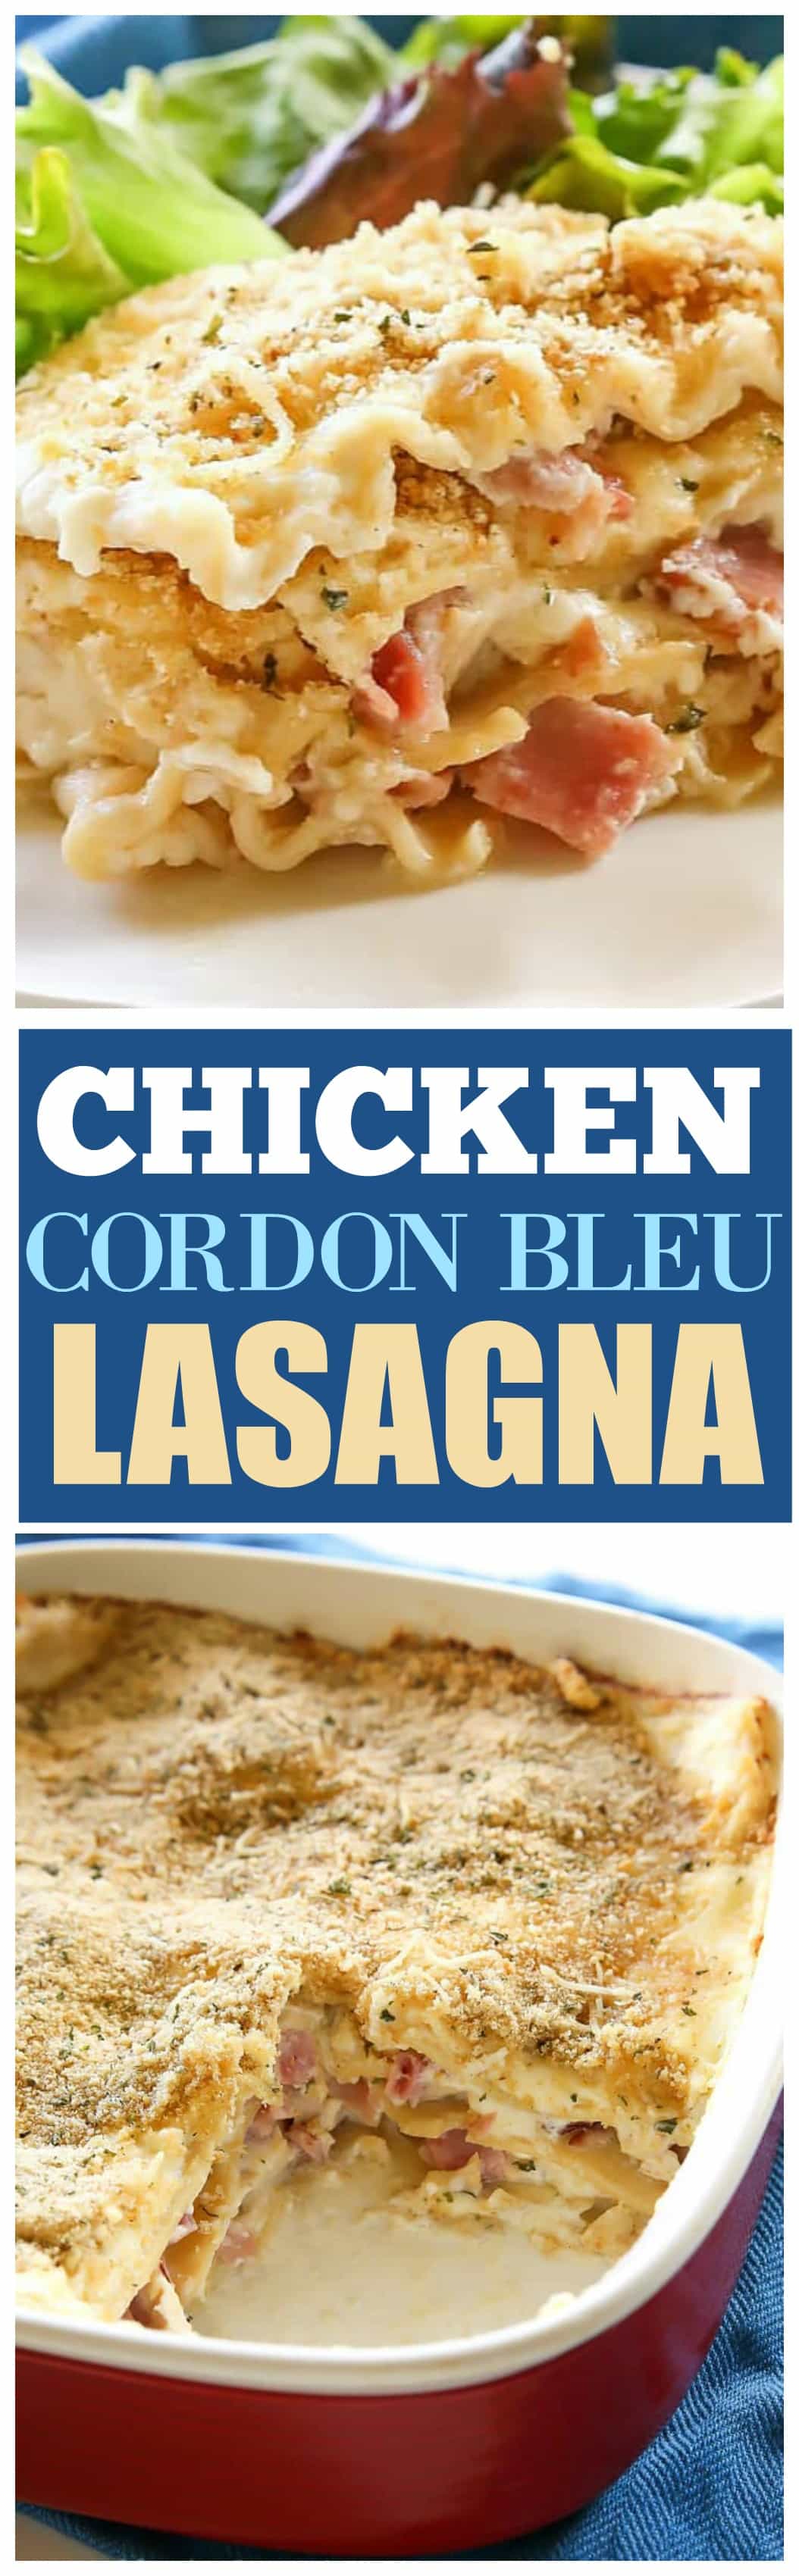 Chicken Cordon Bleu Lasagna - comfort food at its best. Layers of ham, chicken, and creamy white sauce make for a tasty dinner. www.the-girl-who-ate-everything.com